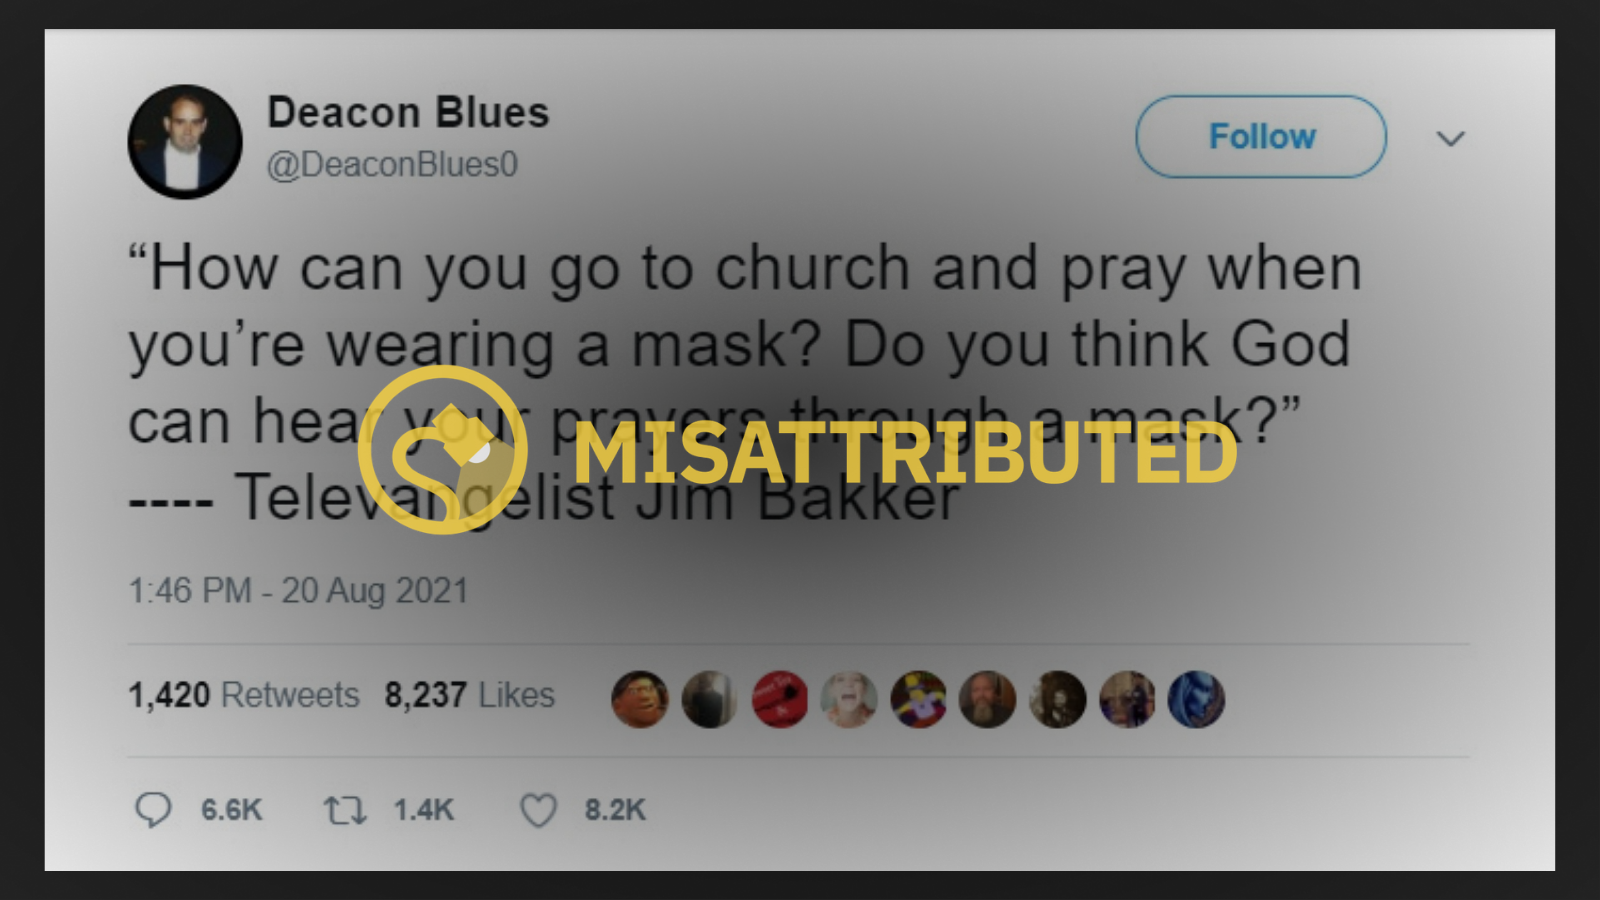 How can you go to church and pray when you’re wearing a mask? Do you think God can hear your prayers through a mask?